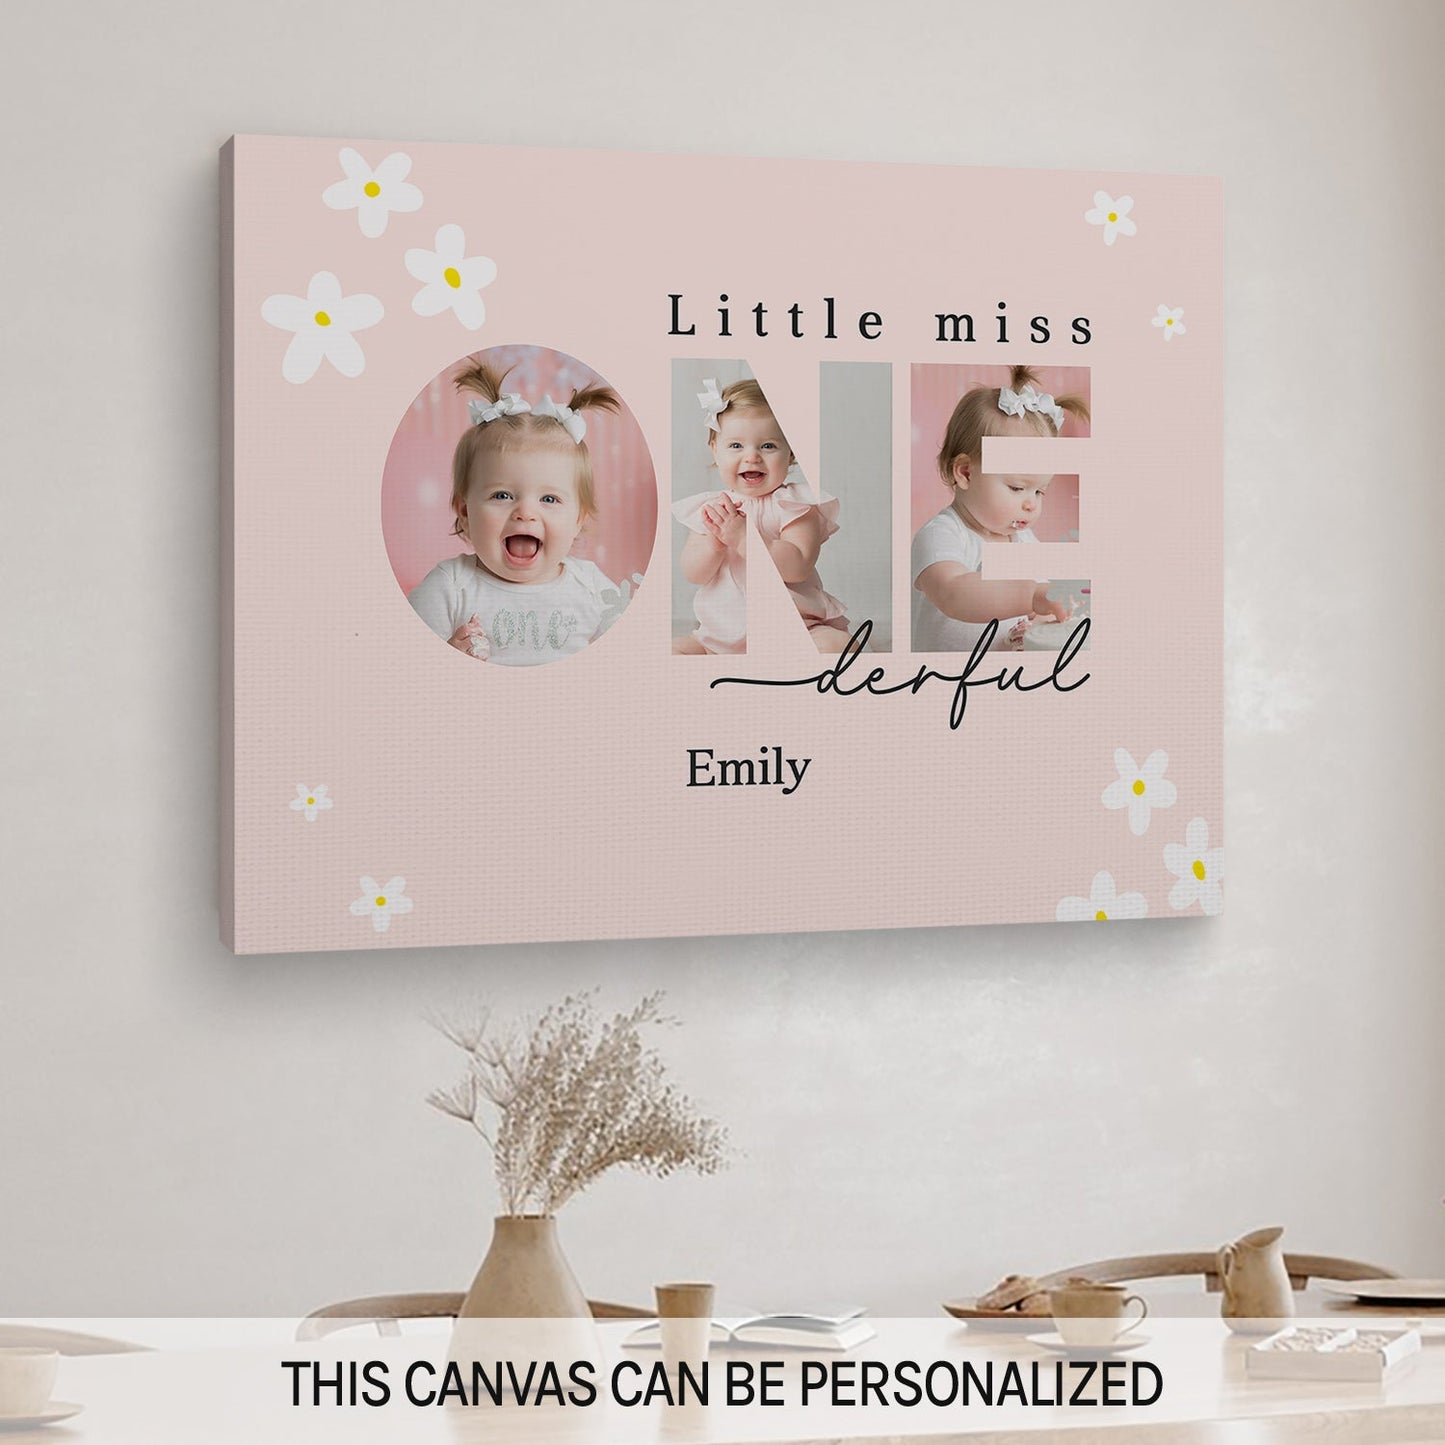 Little Miss Onederdul - Personalized  gift For 1 Year Old Girl - Custom Canvas Print - MyMindfulGifts